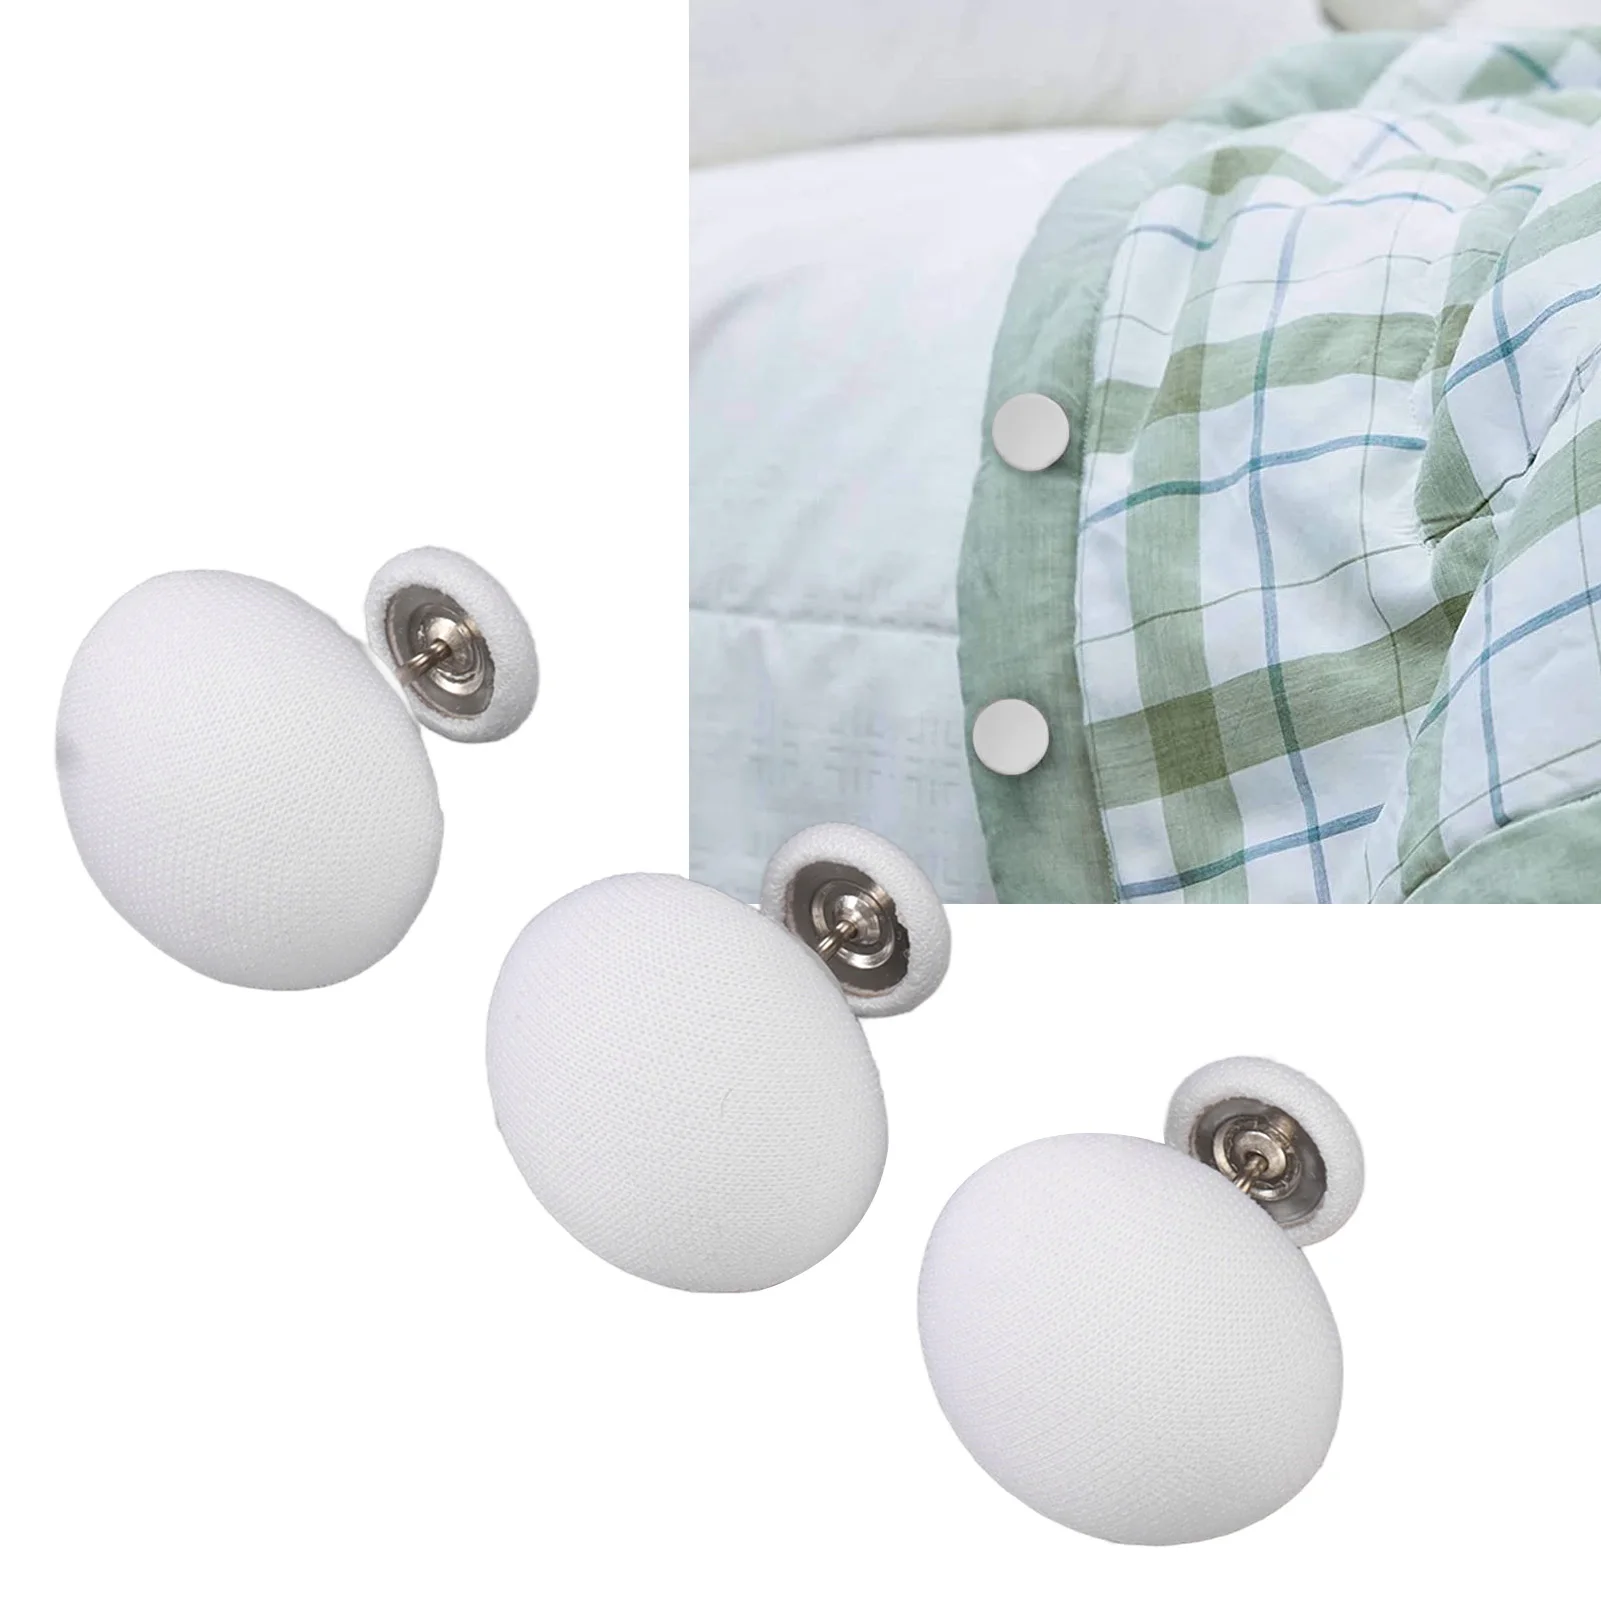 

16Pcs/set Duvet Cover Clip Mushroom Shape Compact Comfortable Touch Firm Fixing for Bed Sheet Pillow Cover Fastener Clip Pins